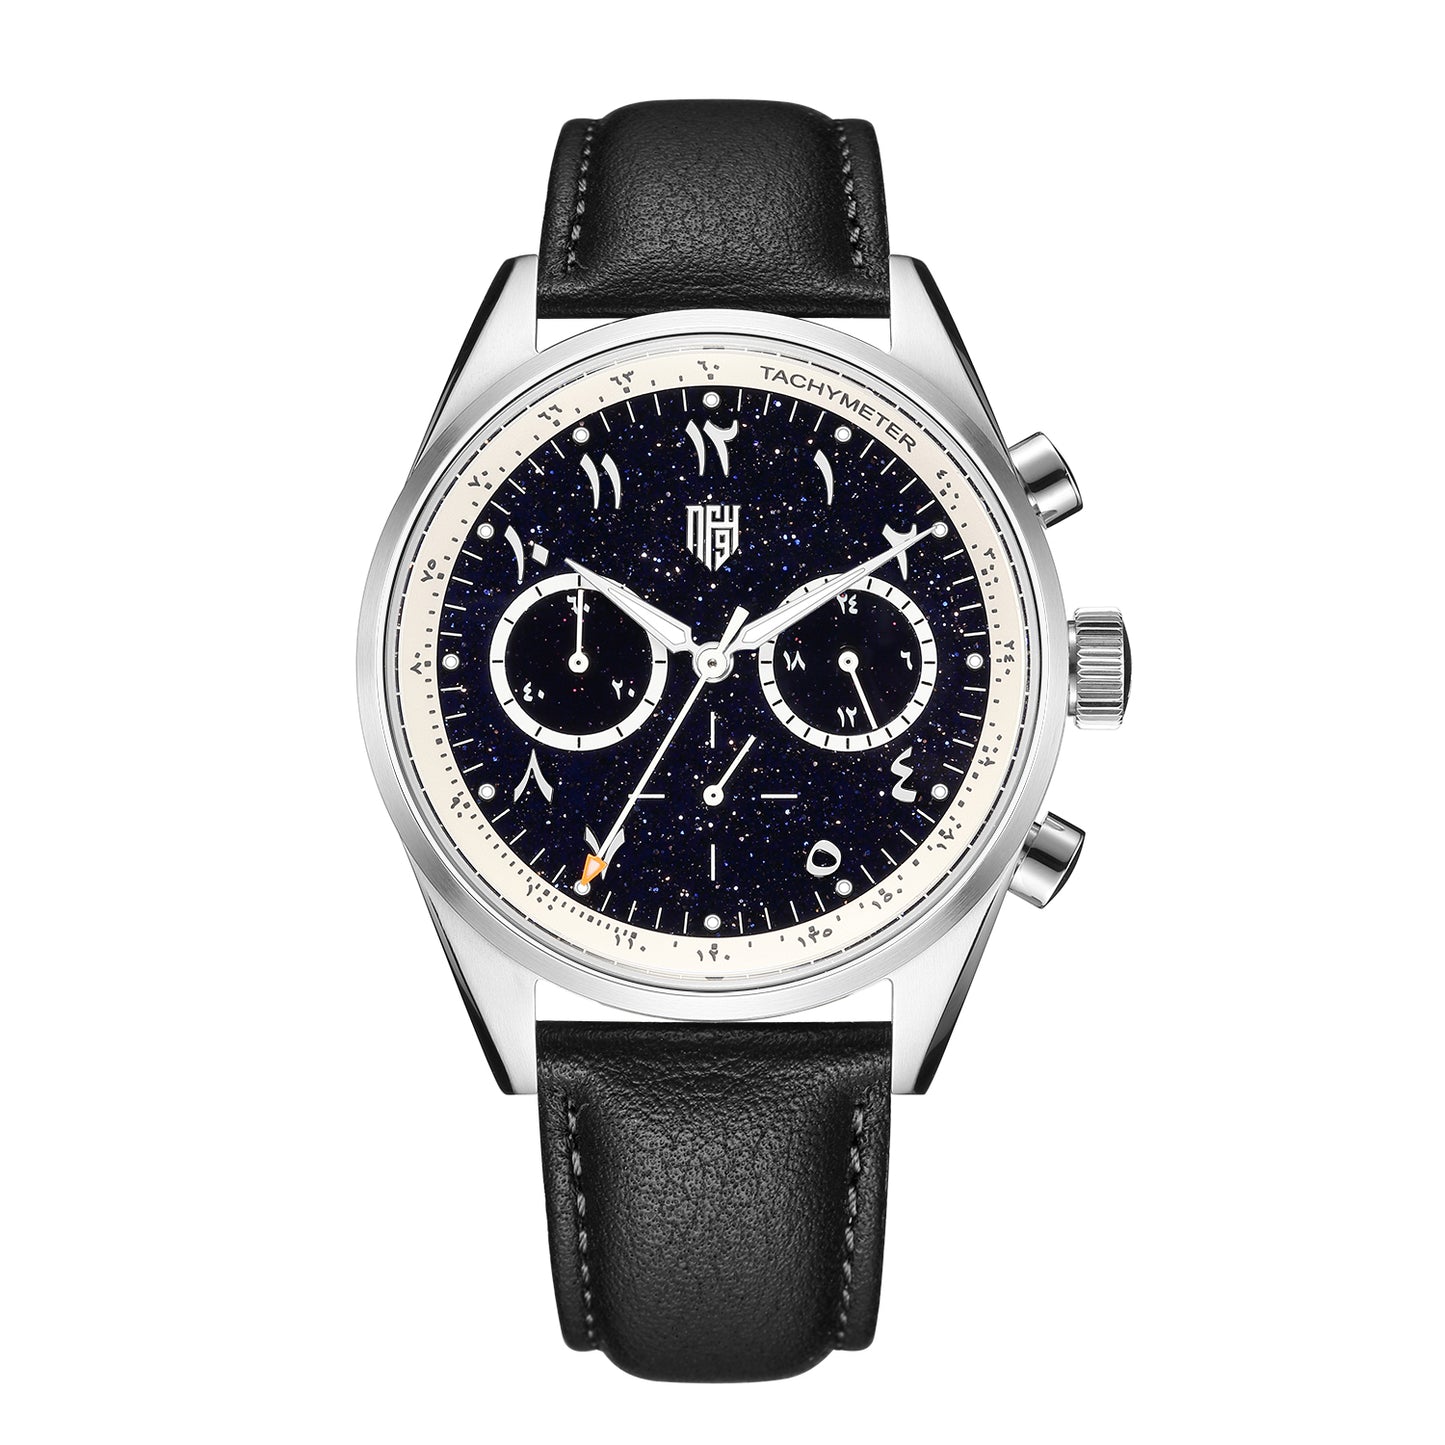 Culture Chronograph 2-Constellation dial